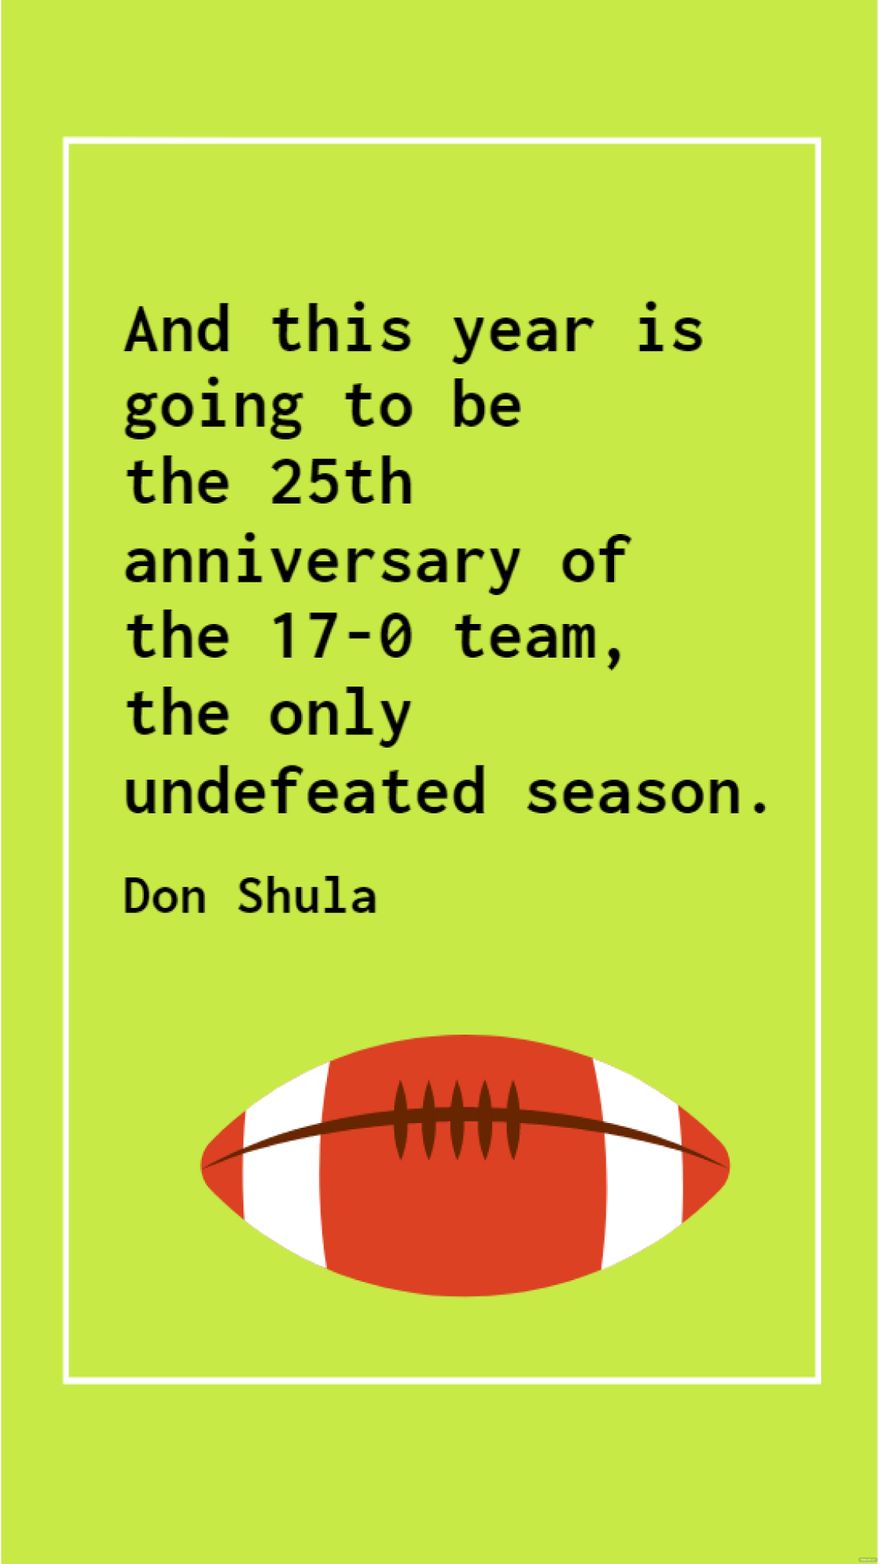 Don Shula - And this year is going to be the 25th anniversary of the 17-0 team, the only undefeated season.